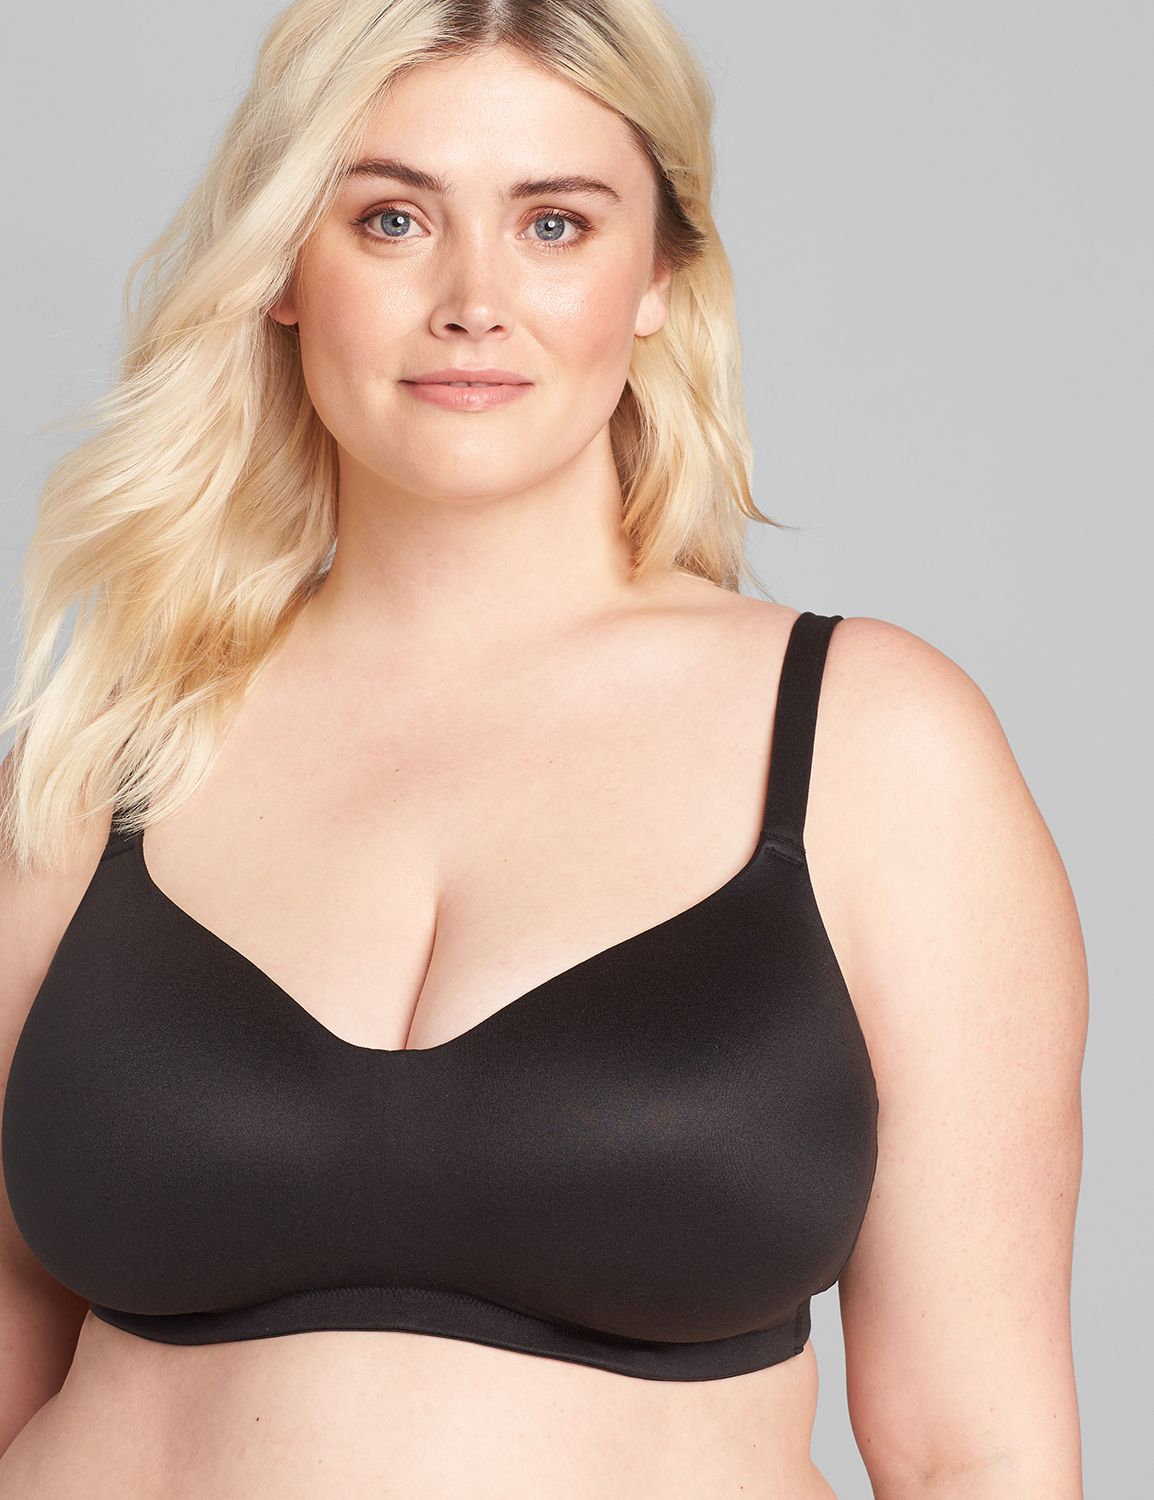 Amoena Mastectomy Bra - New!! - 83% Cotton - Sold out!